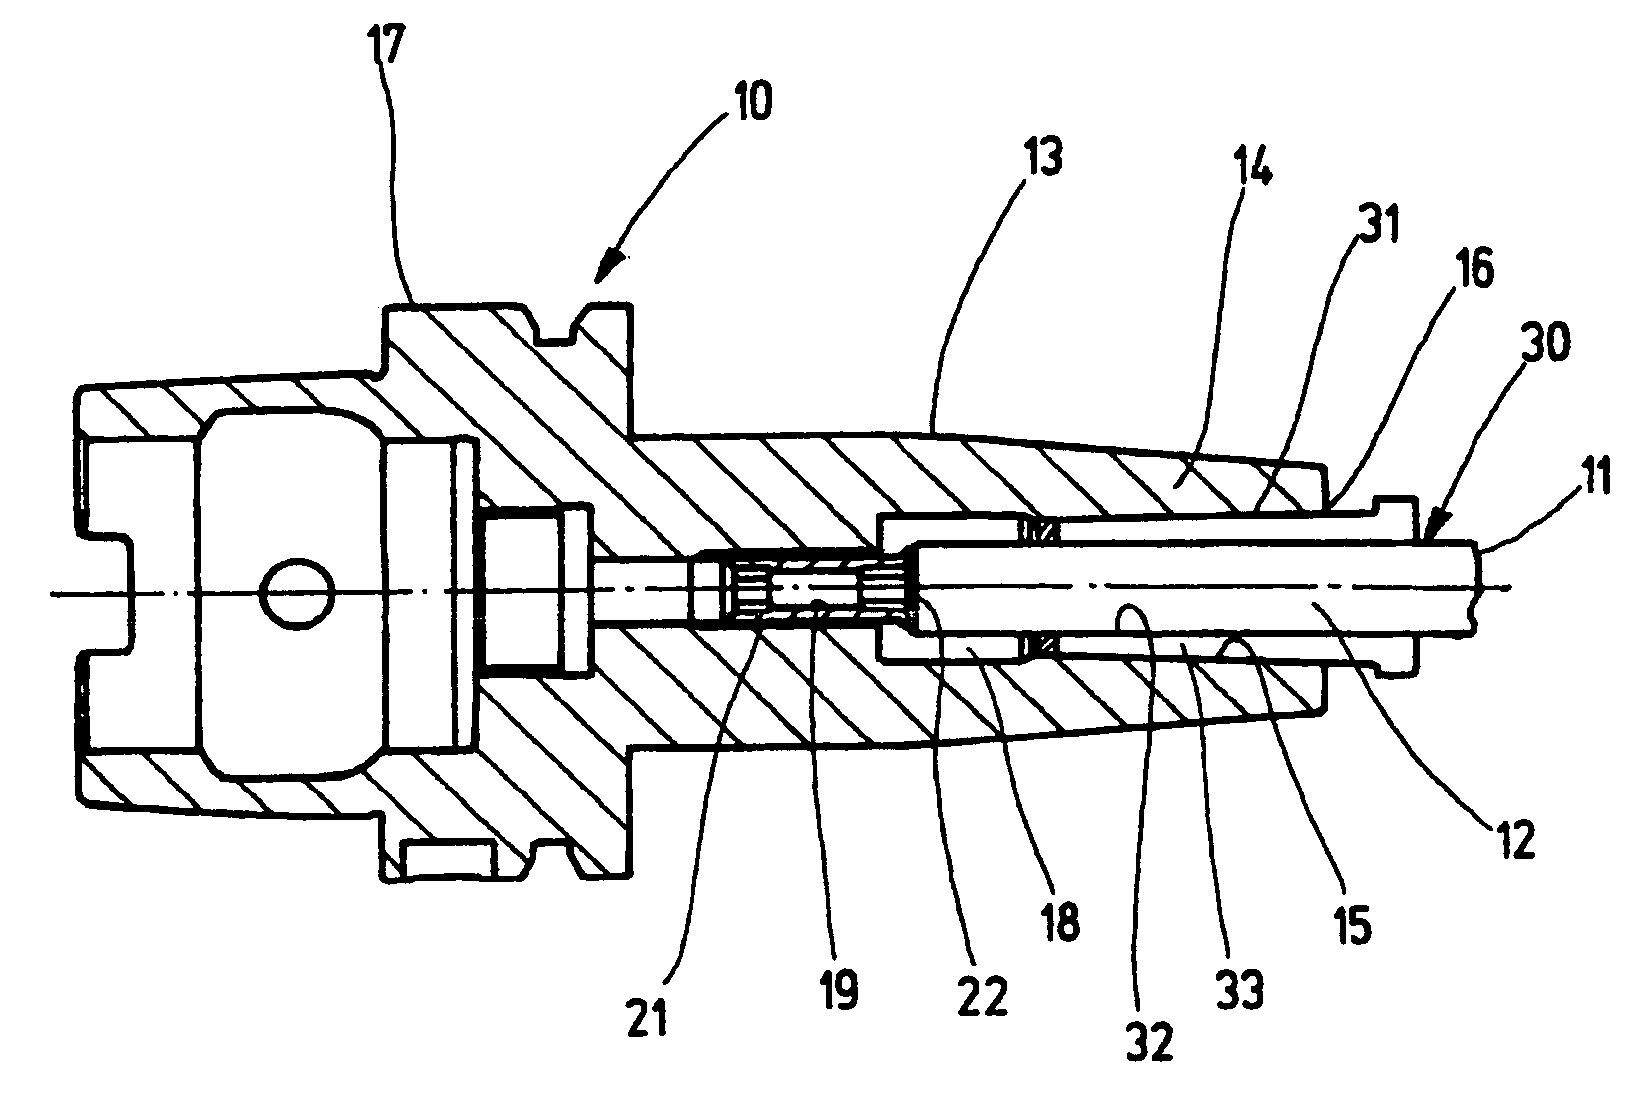 Tool holder for shrink-fit attachment of rotating tools with predominantly cylindrical shafts